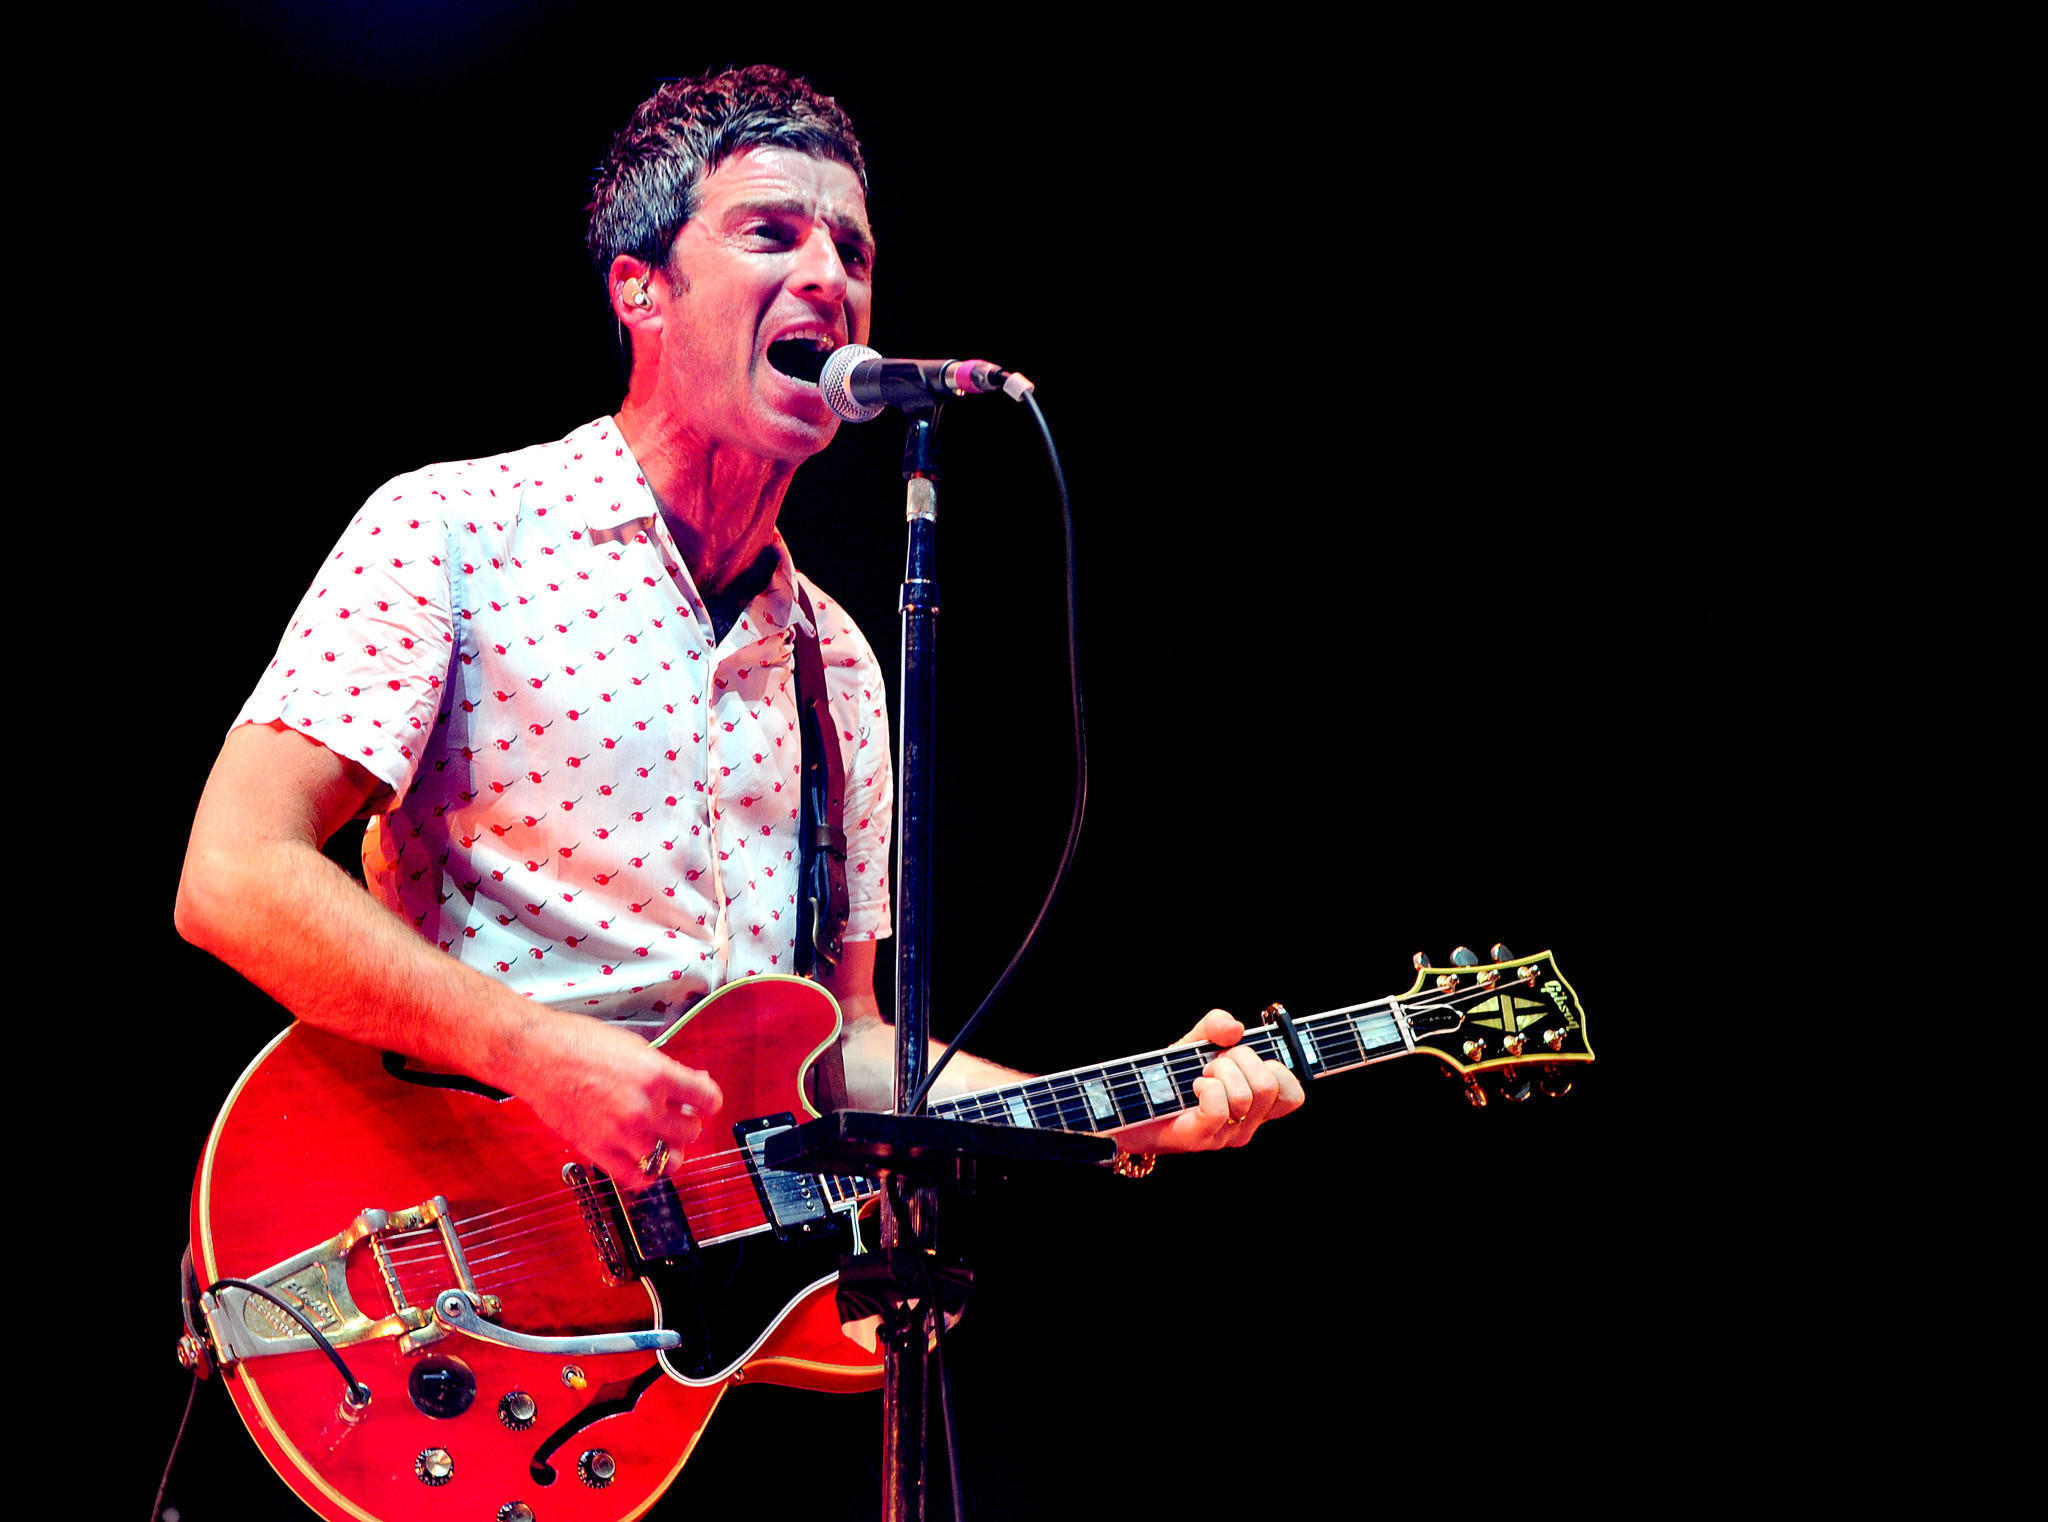 Noel Gallagher gets emotional at first Manchester Arena show since bombing - LA Times